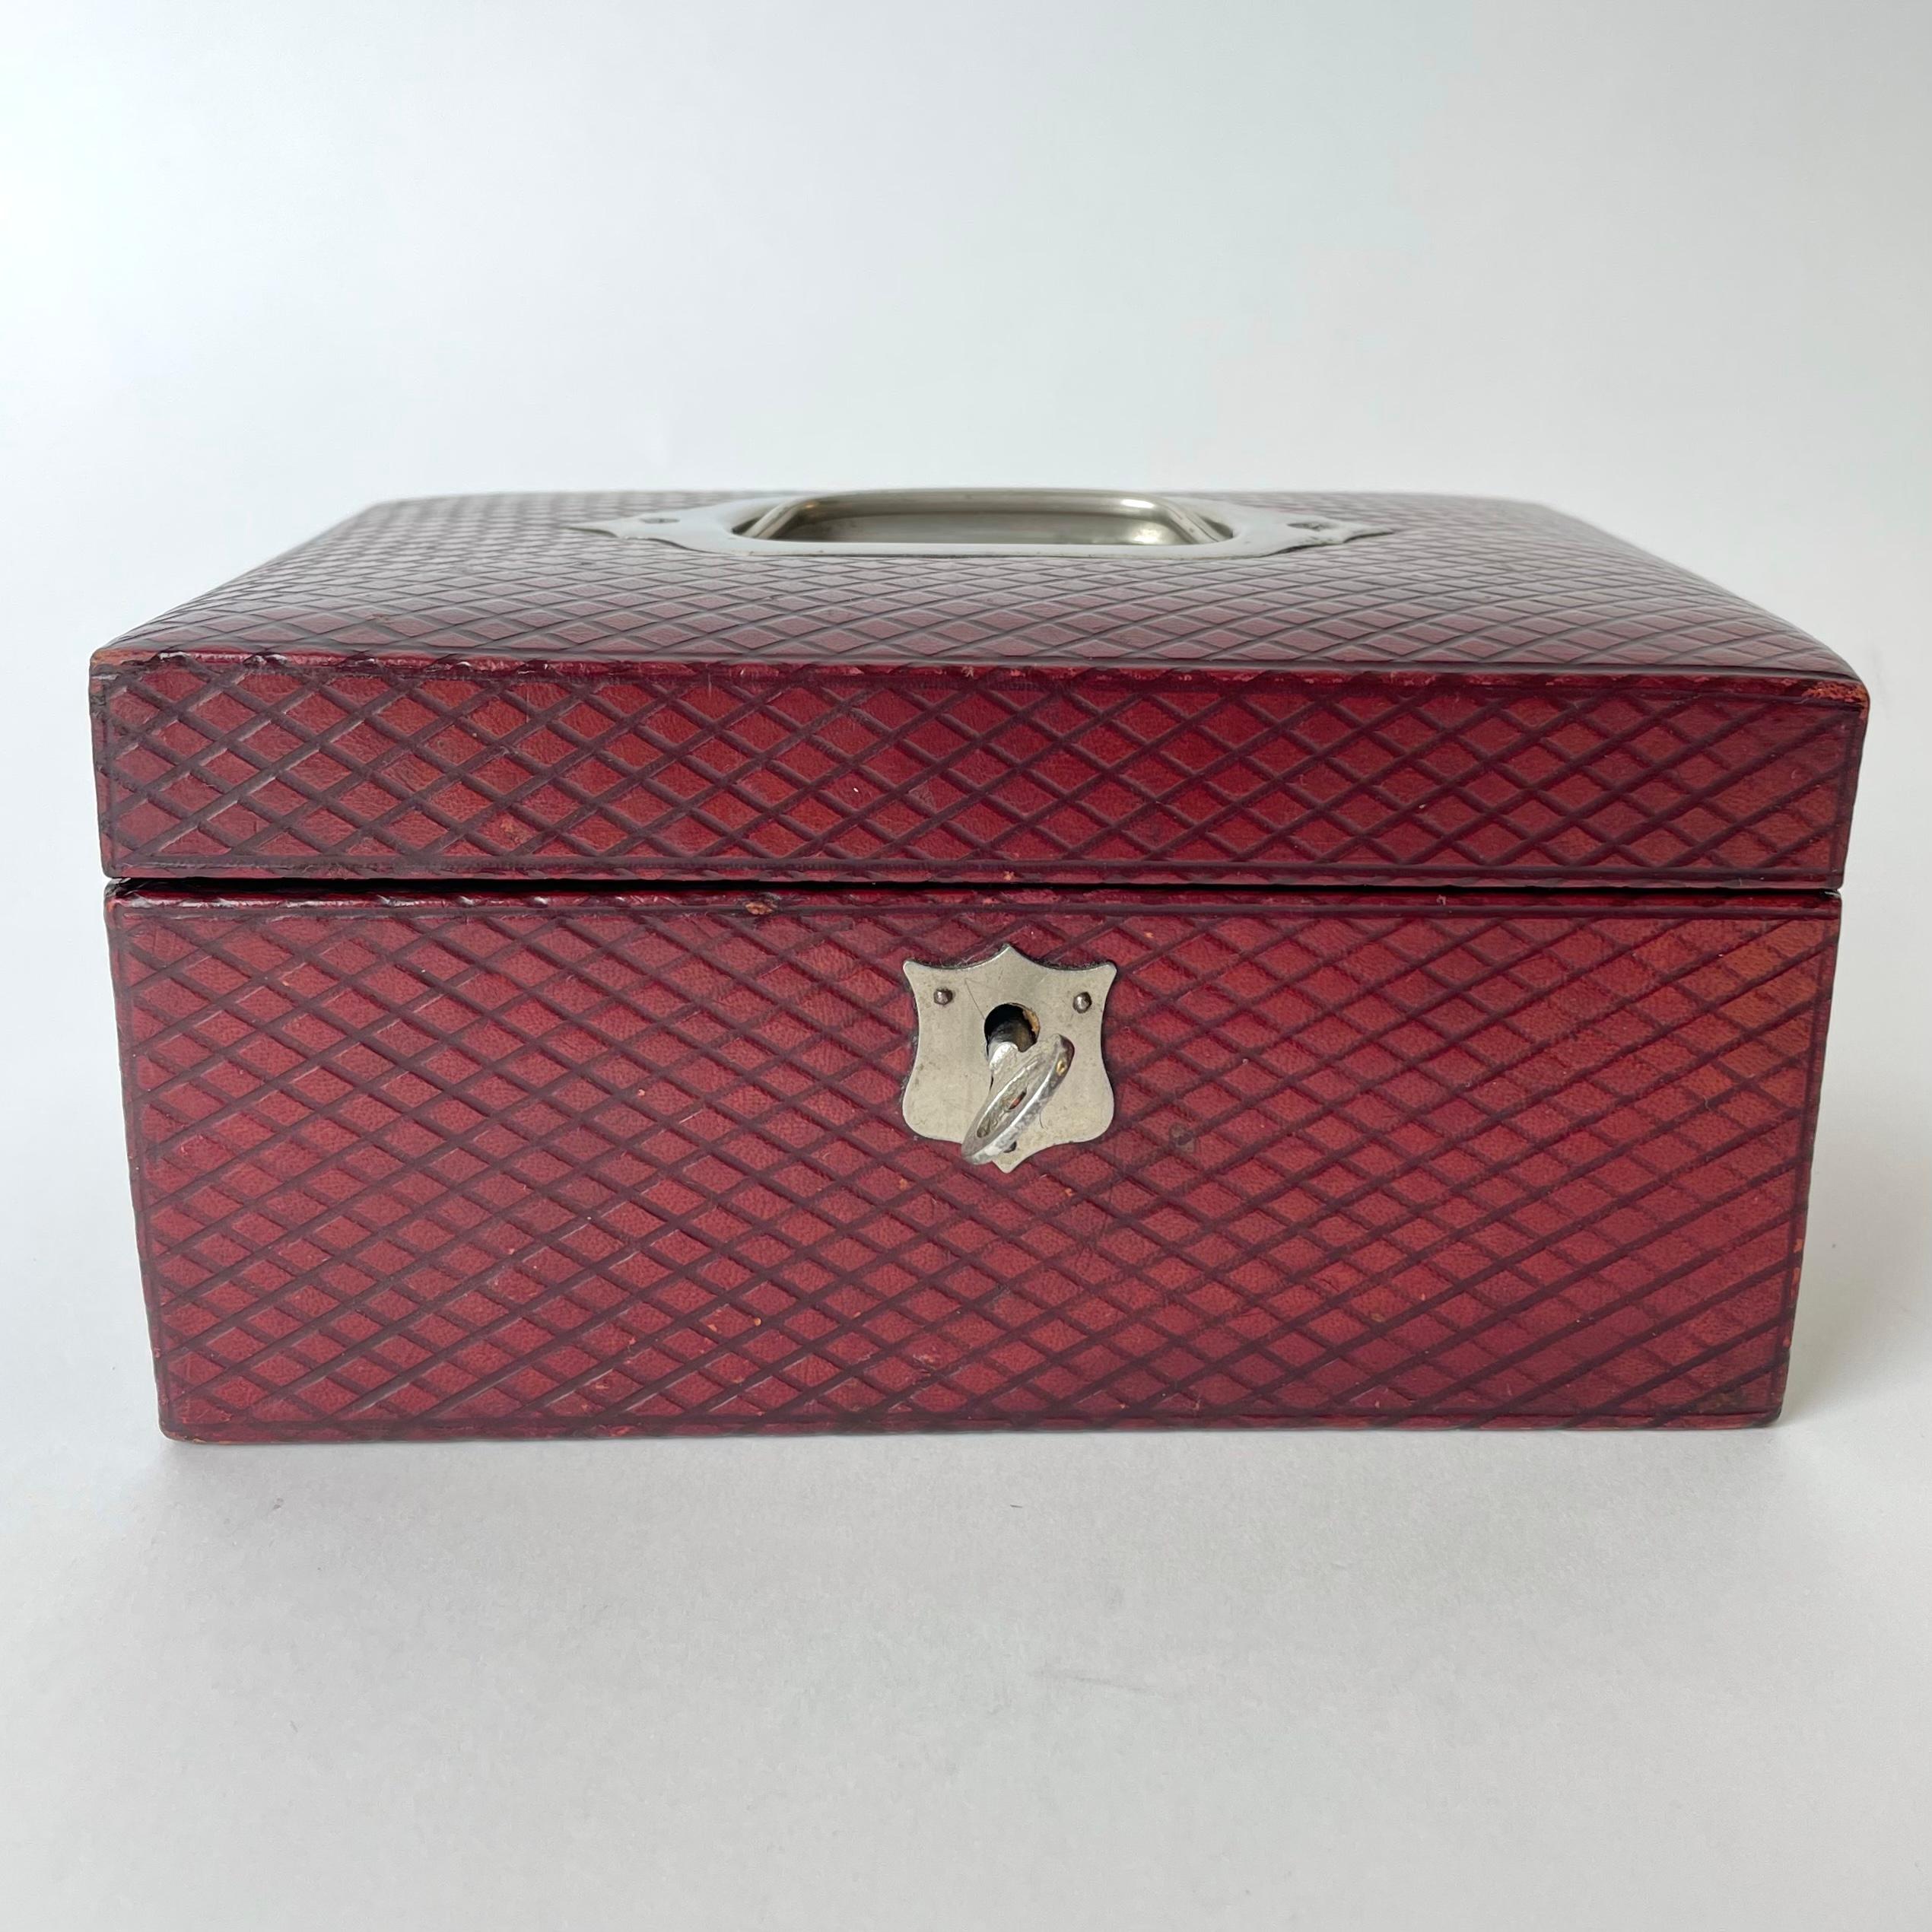 red leather box